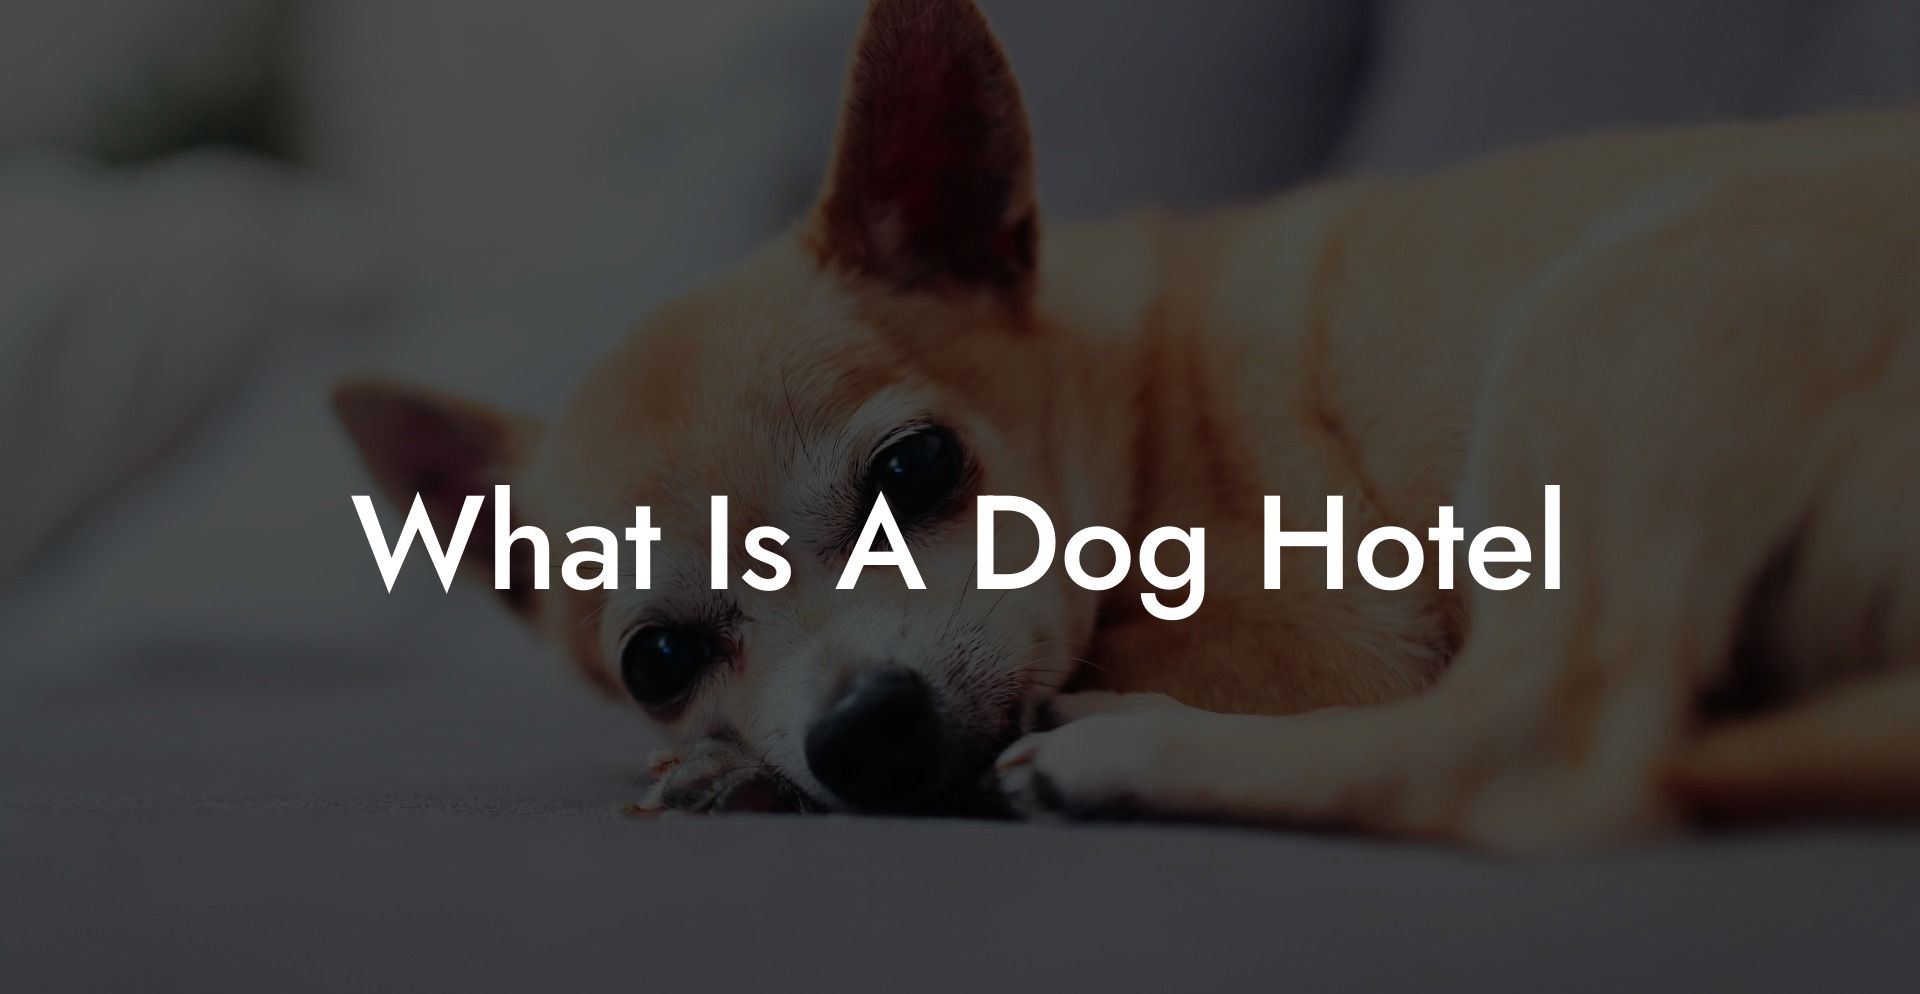 What Is A Dog Hotel?